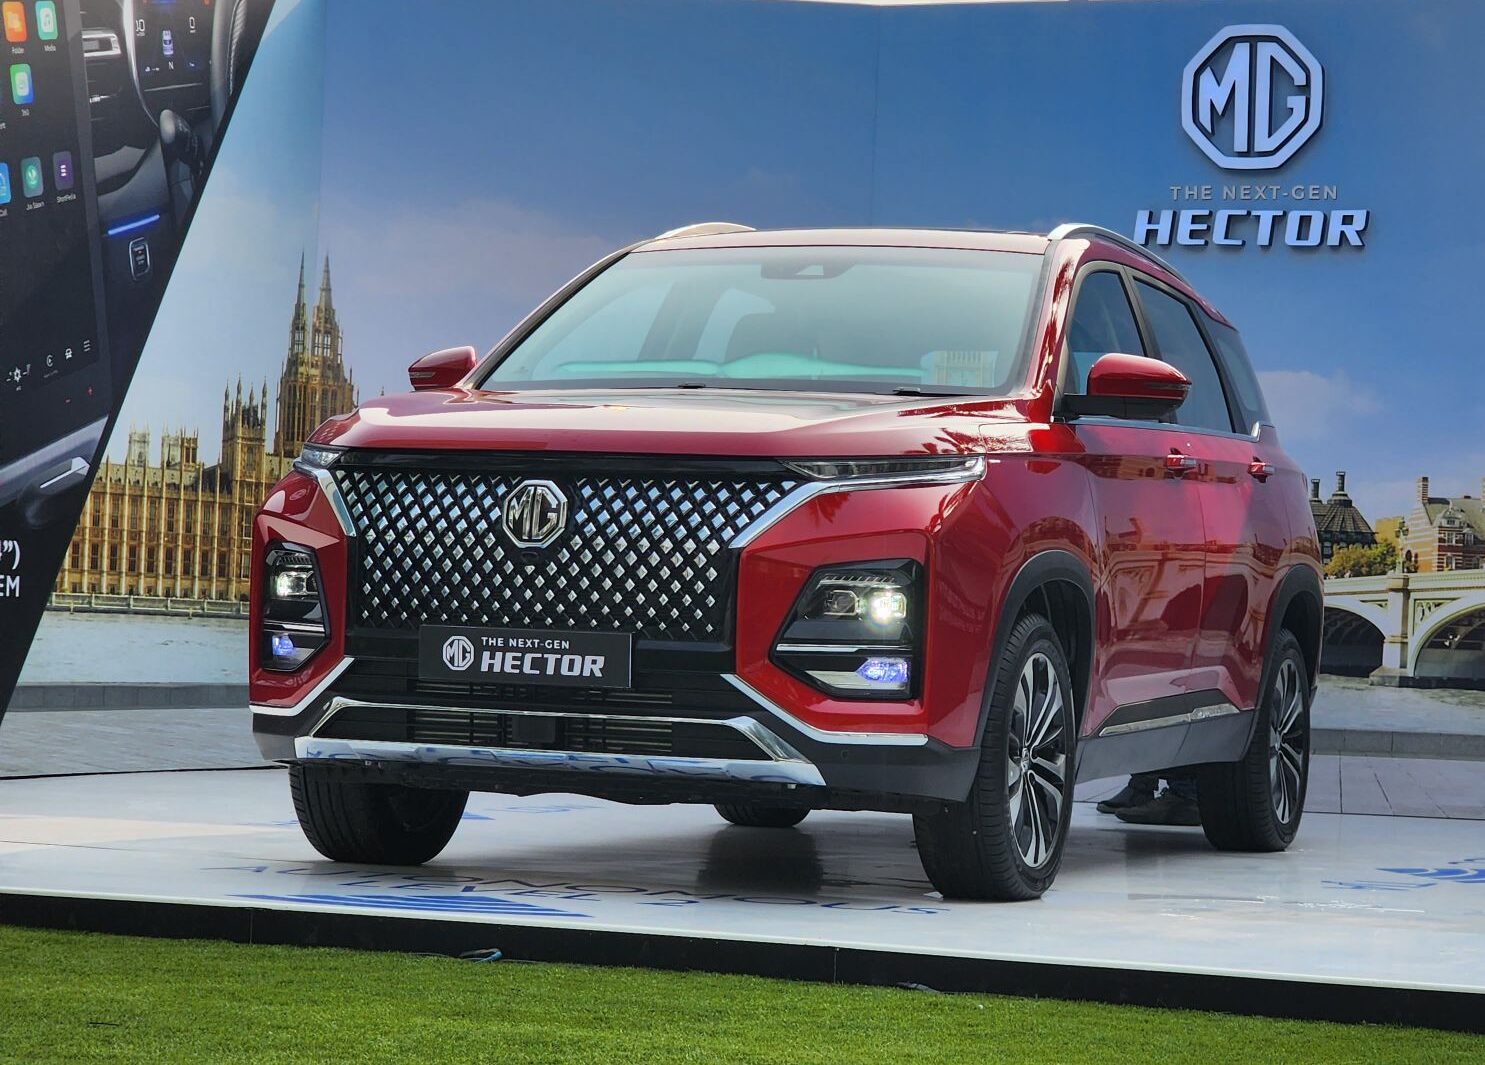 MG Hector Shine Variant Re-Introduced, Price Hiked